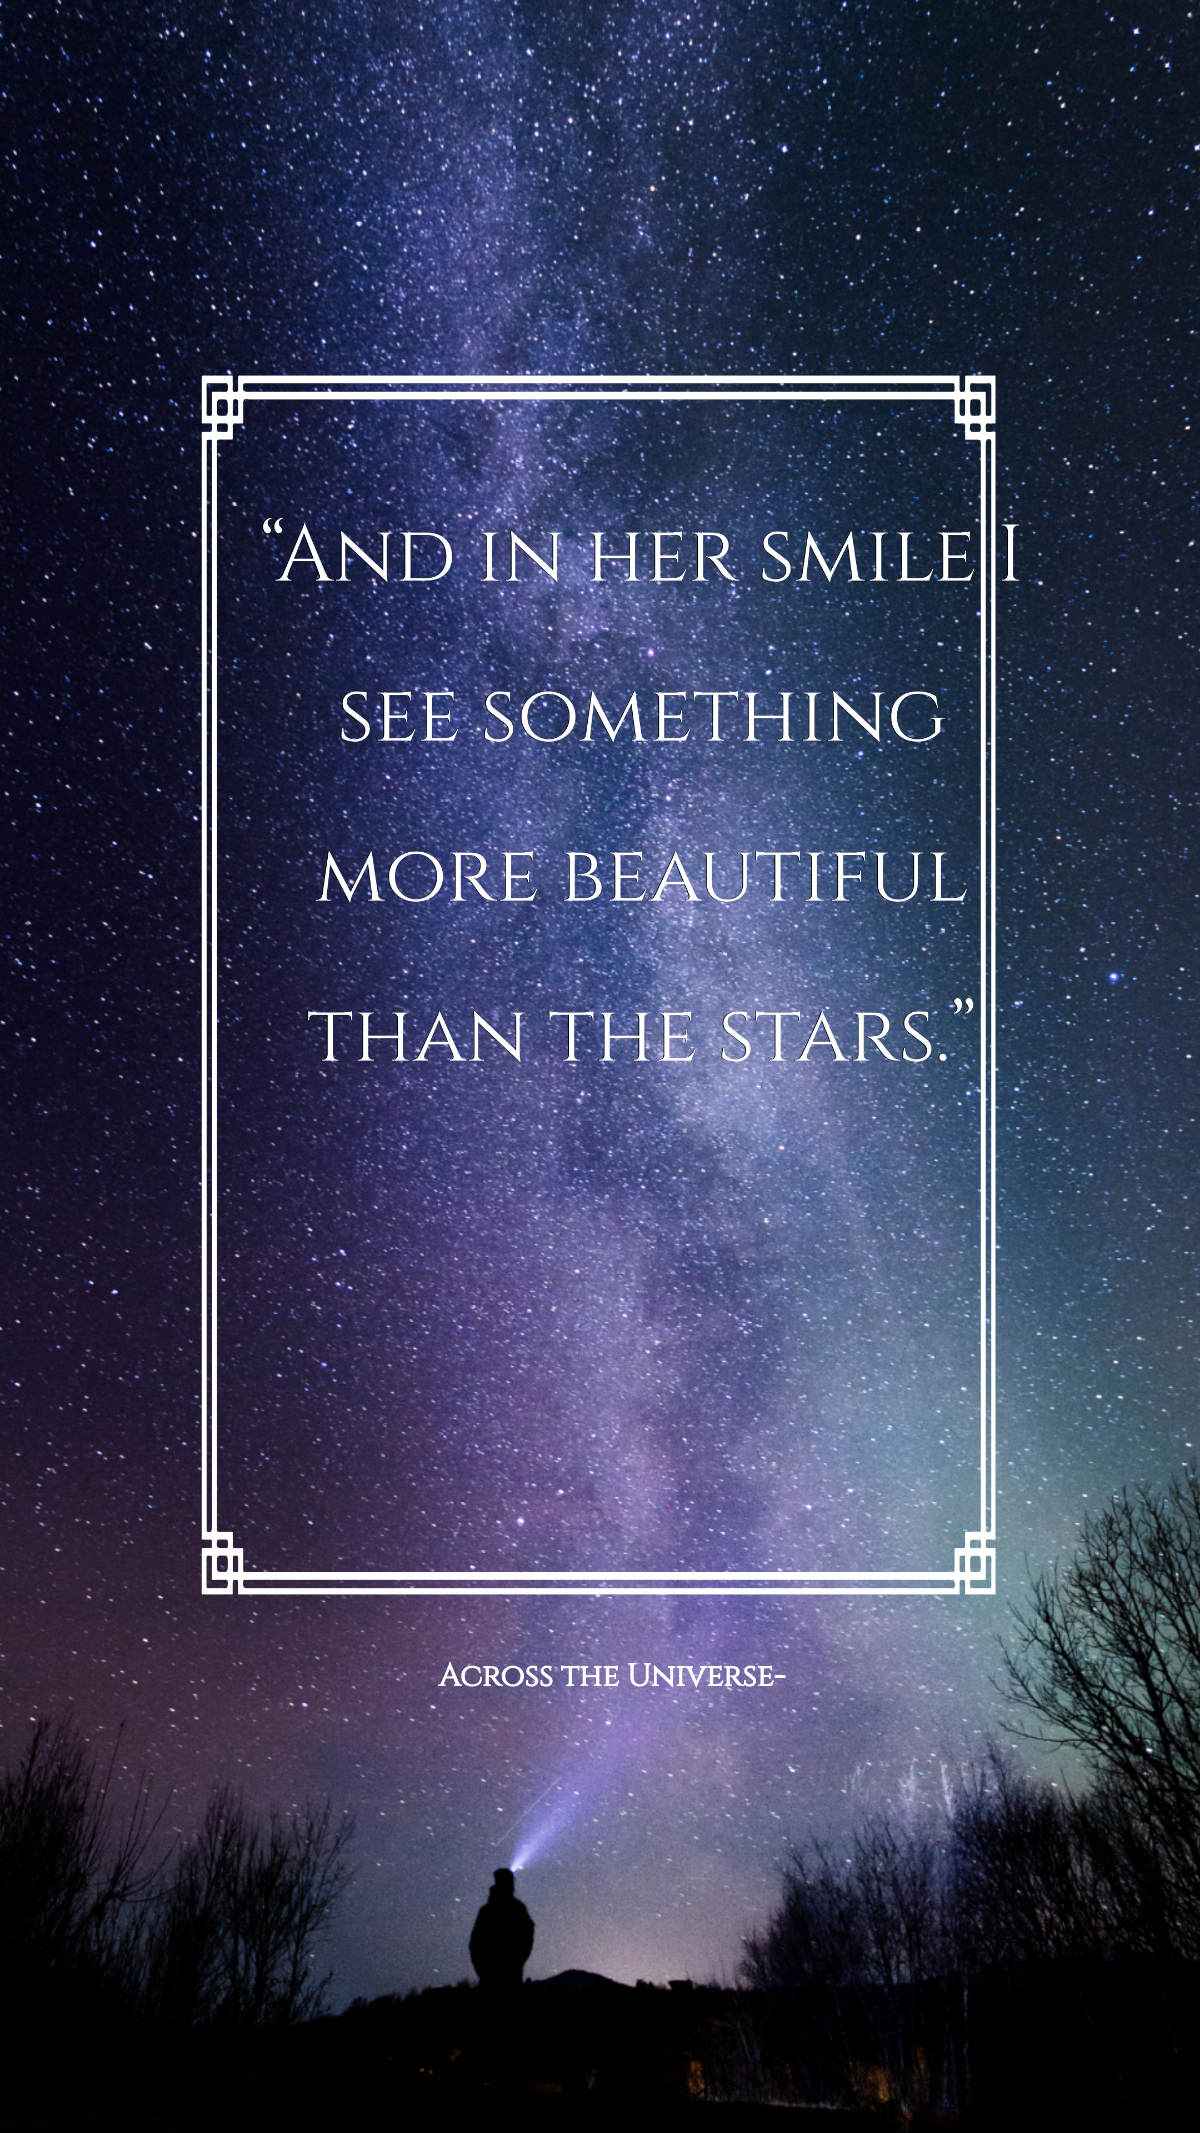 Across the Universe — “And in her smile I see something more beautiful than the stars.”